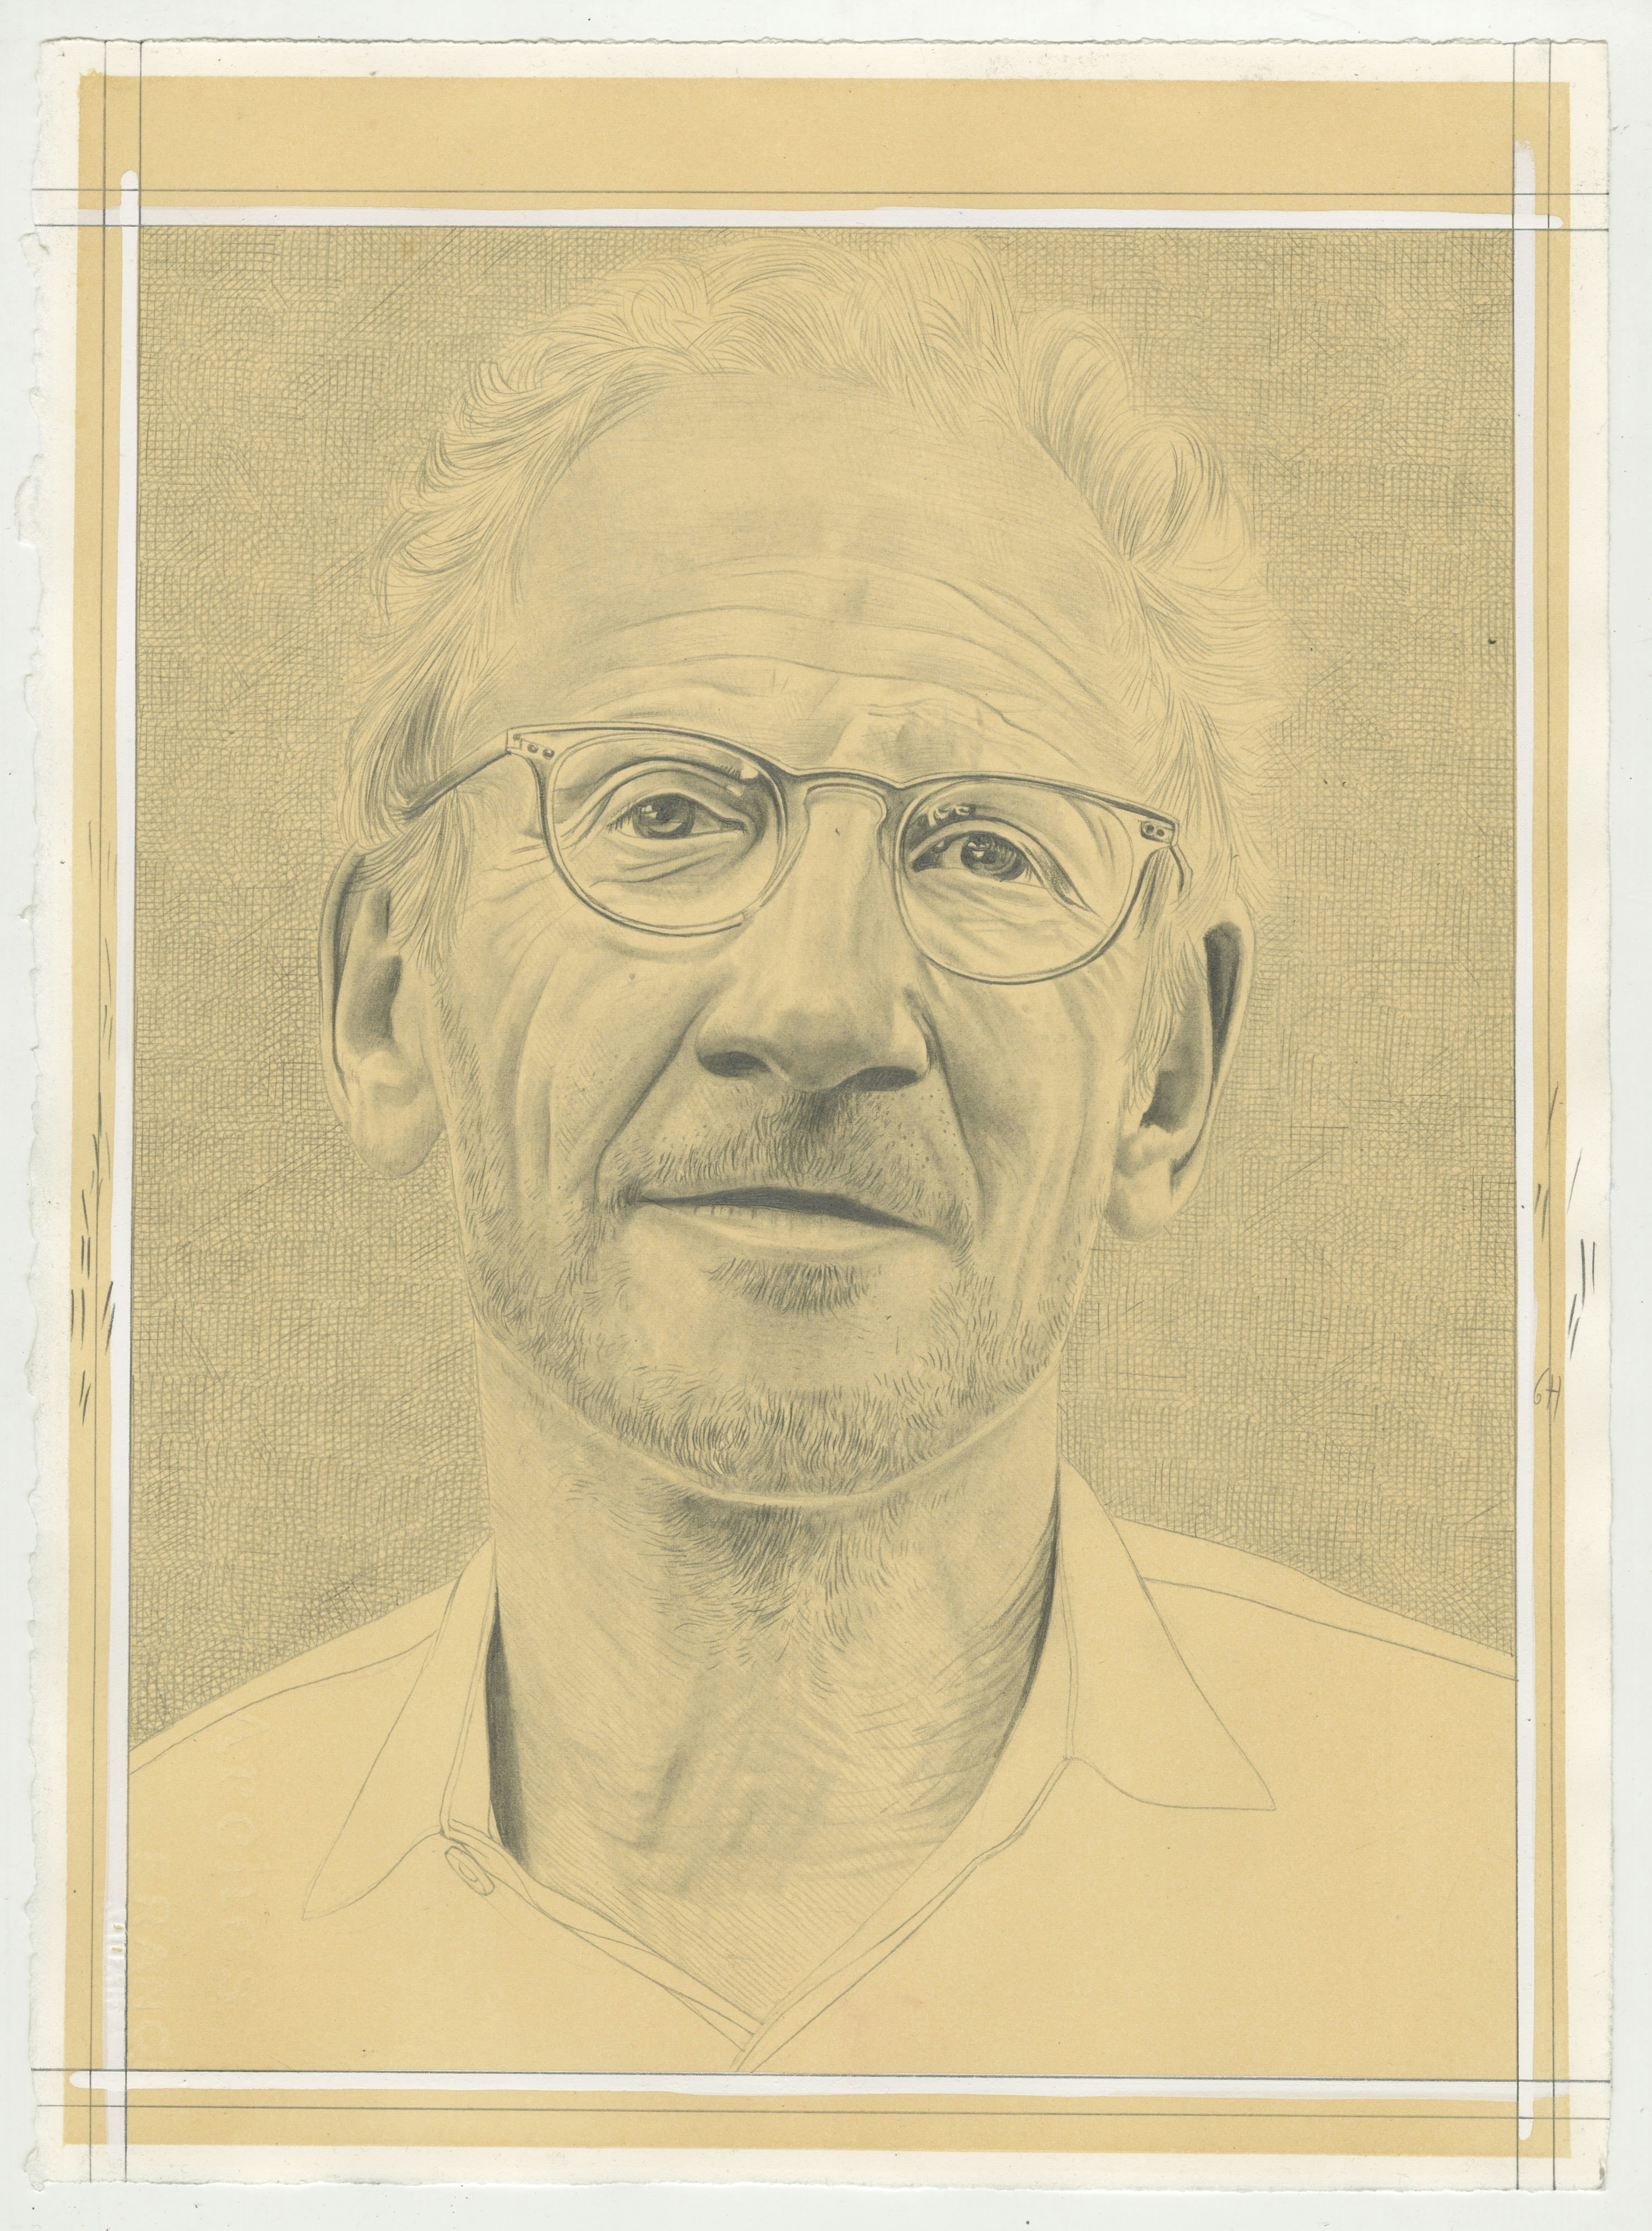 Portrait of Mitch Epstein, pencil on paper by Phong H. Bui.